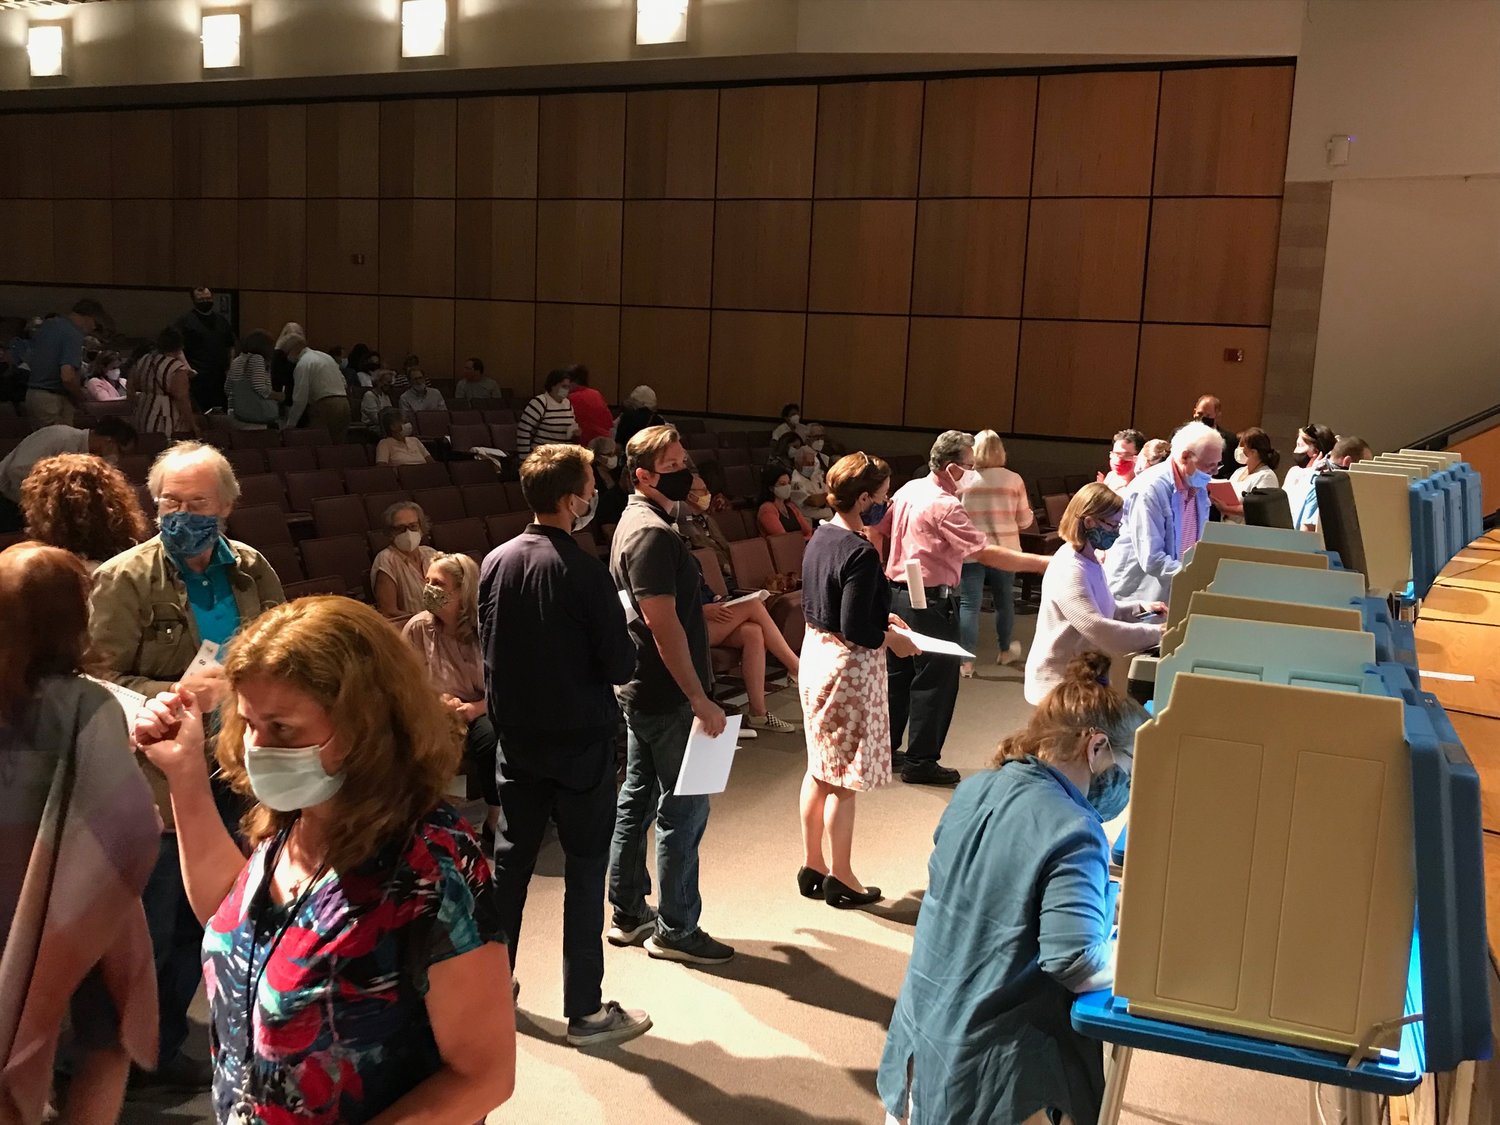 Barrington households carry a tax burden that is, on average, 12 percent higher than the next closest community. Pictured are taxpayers voting at last year’s financial town meeting on whether to purchase the Carmelite Monastery property.